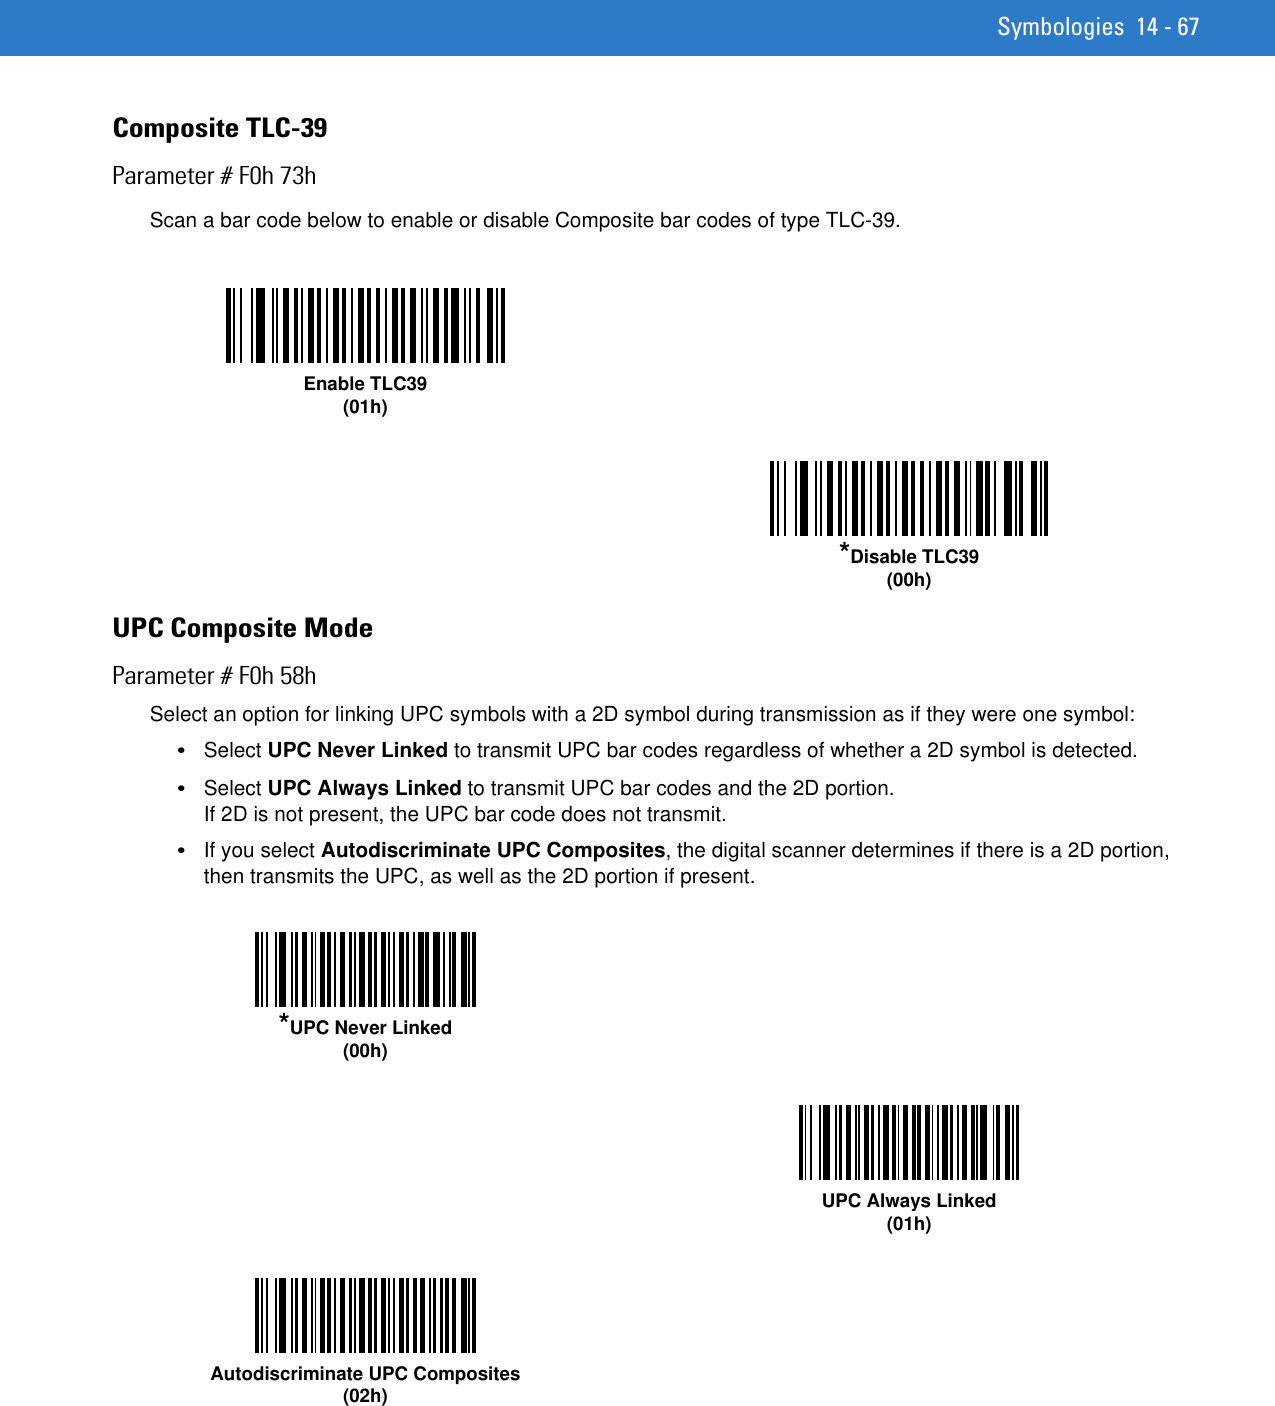 Symbologies 14 - 67Composite TLC-39Parameter # F0h 73hScan a bar code below to enable or disable Composite bar codes of type TLC-39. UPC Composite ModeParameter # F0h 58hSelect an option for linking UPC symbols with a 2D symbol during transmission as if they were one symbol:•Select UPC Never Linked to transmit UPC bar codes regardless of whether a 2D symbol is detected.•Select UPC Always Linked to transmit UPC bar codes and the 2D portion. If 2D is not present, the UPC bar code does not transmit.•If you select Autodiscriminate UPC Composites, the digital scanner determines if there is a 2D portion, then transmits the UPC, as well as the 2D portion if present.Enable TLC39(01h)*Disable TLC39(00h)*UPC Never Linked(00h)UPC Always Linked(01h)Autodiscriminate UPC Composites(02h)